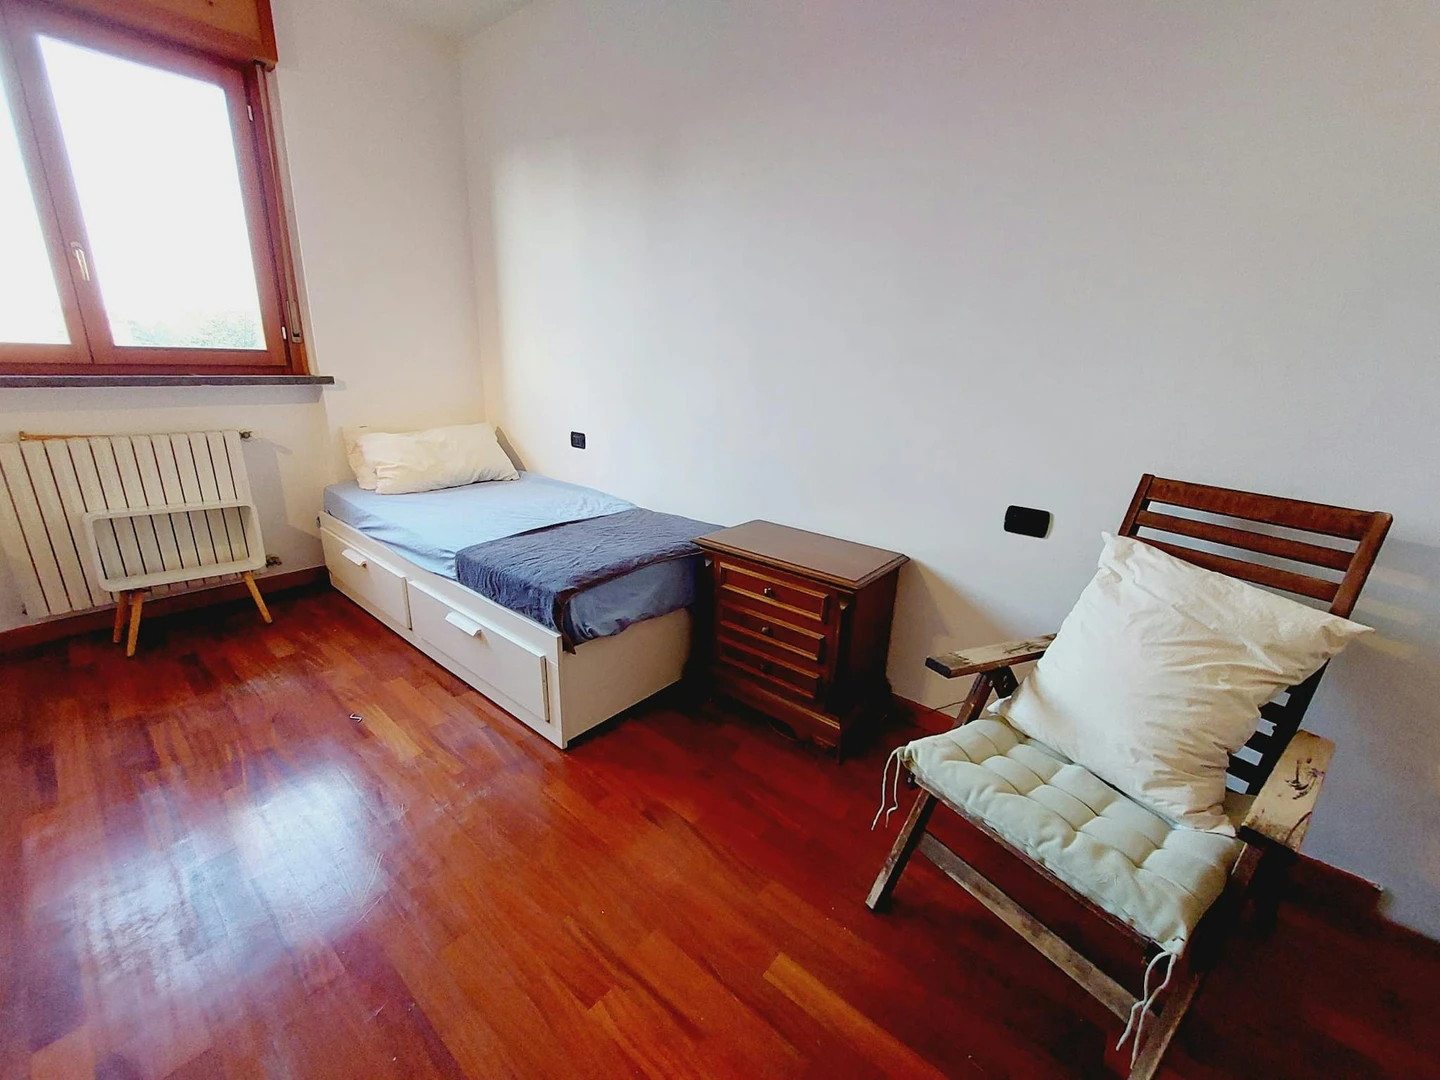 Room for rent in a shared flat in milano